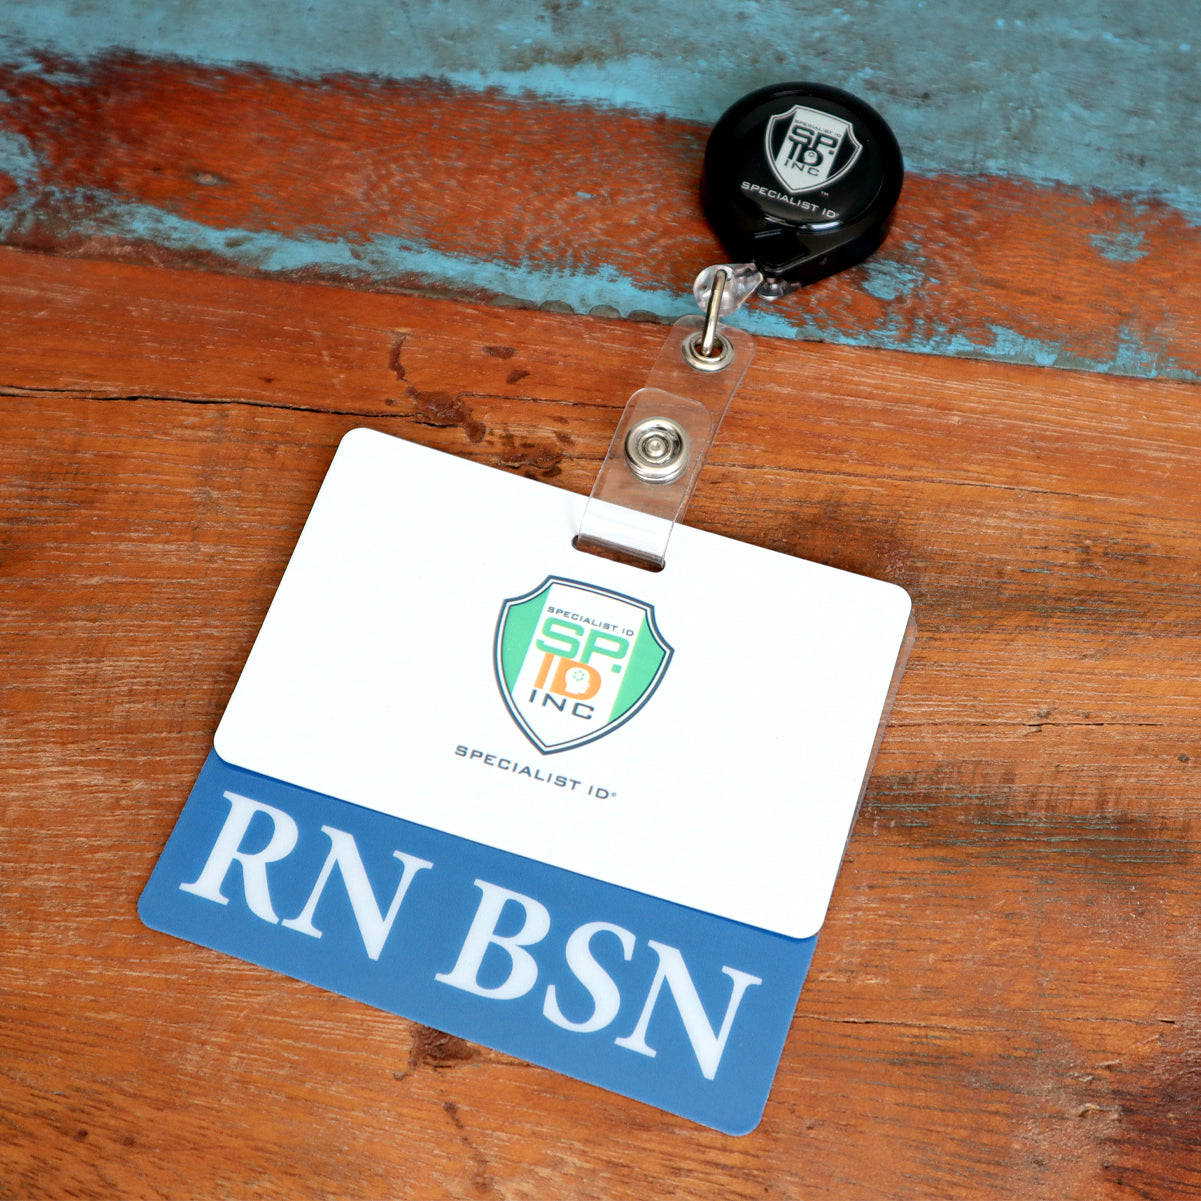 A name badge with "RN BSN" at the bottom and an attached retractable badge holder, placed on a wooden surface. Perfect for nurses with a Bachelor of Science in Nursing, this Clear RN BSN Badge Buddy - Horizontal Nurse ID Badge Backer - Double Sided Print adds a professional touch to your uniform.